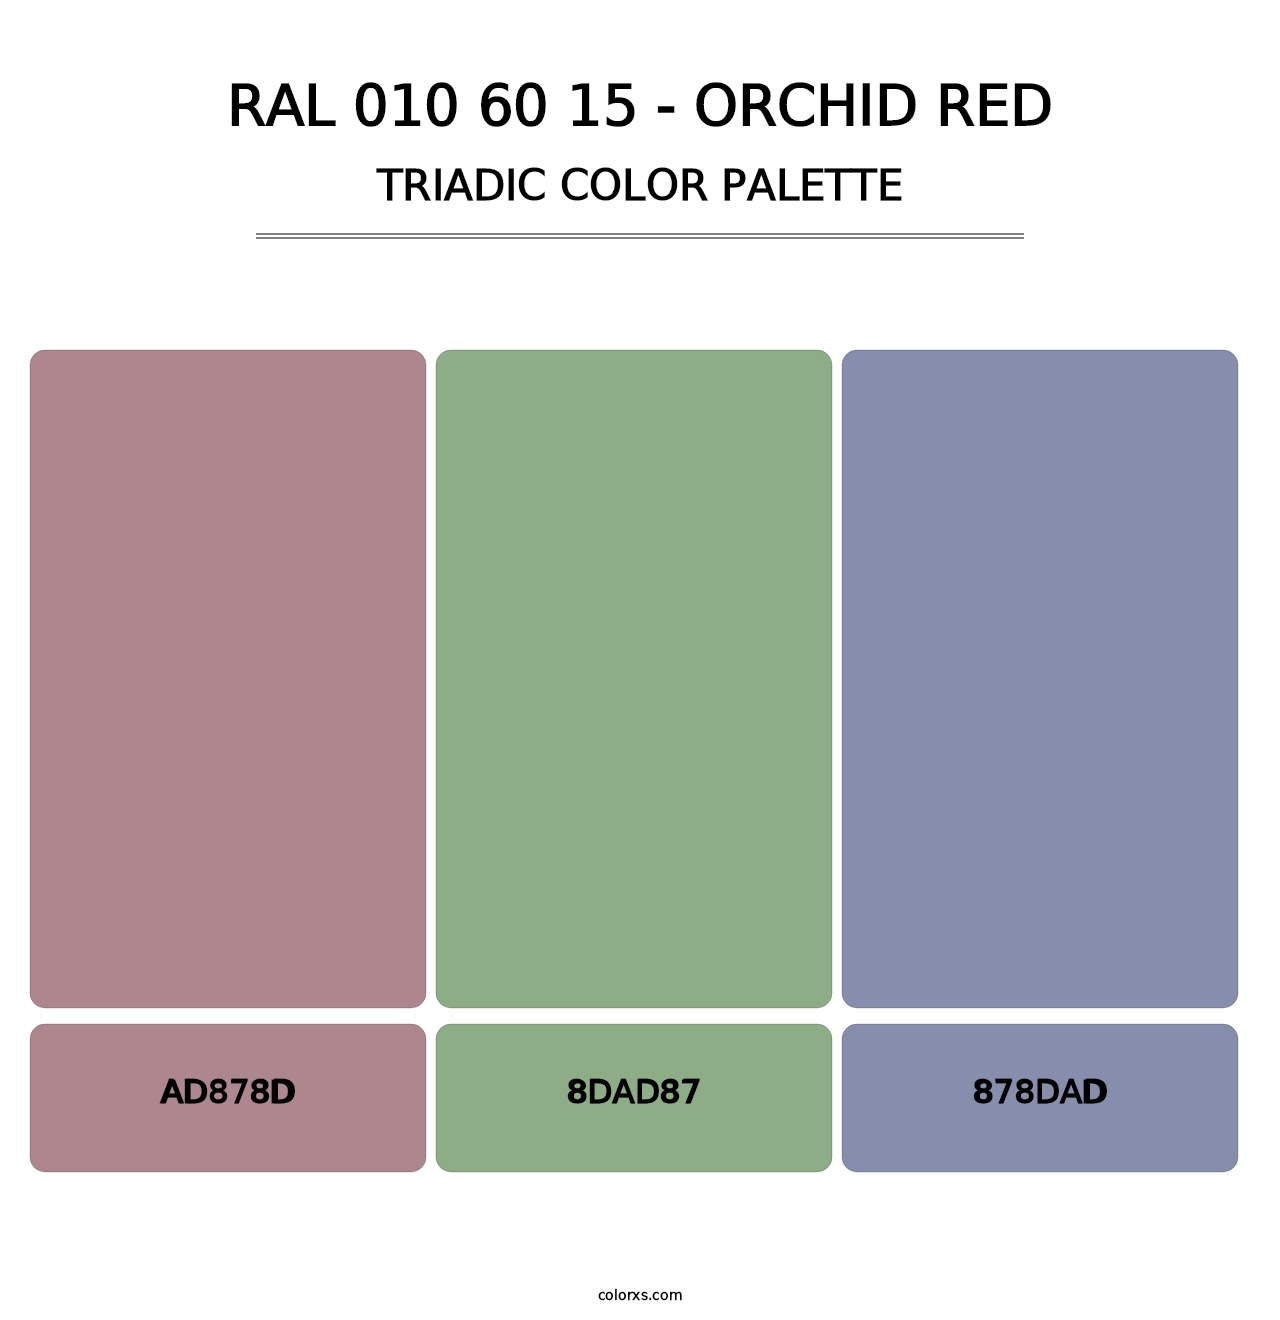 RAL 010 60 15 - Orchid Red - Triadic Color Palette